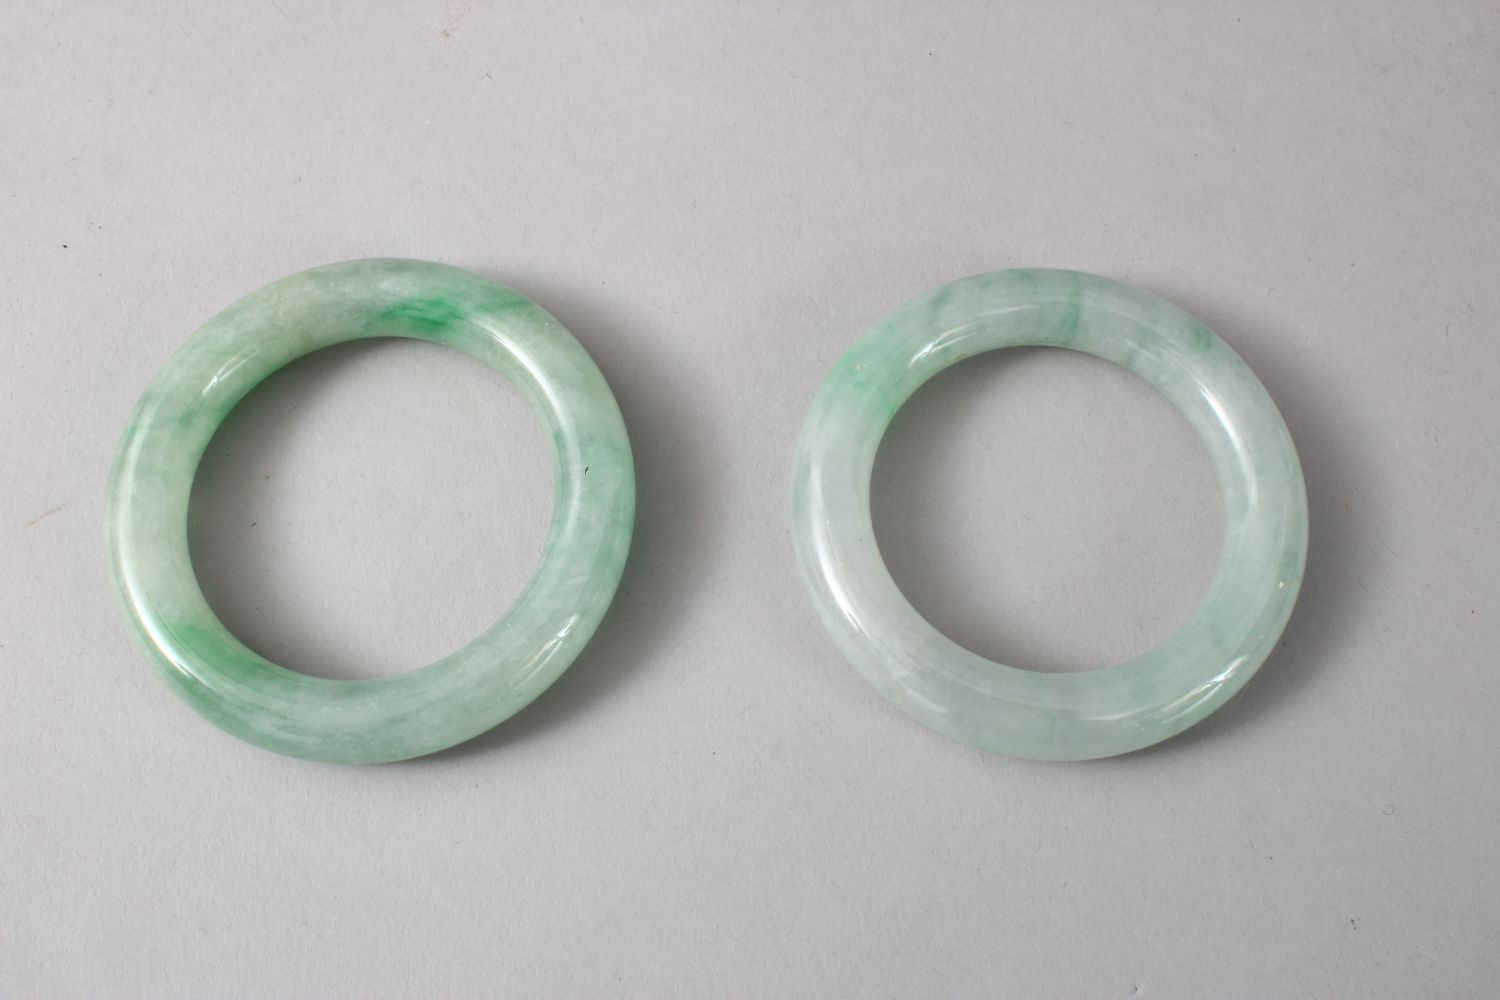 TWO GOOD CHINESE CARVED JADE BANGLES, 8cm diameter with an internal measurement of 5cm. - Image 3 of 5